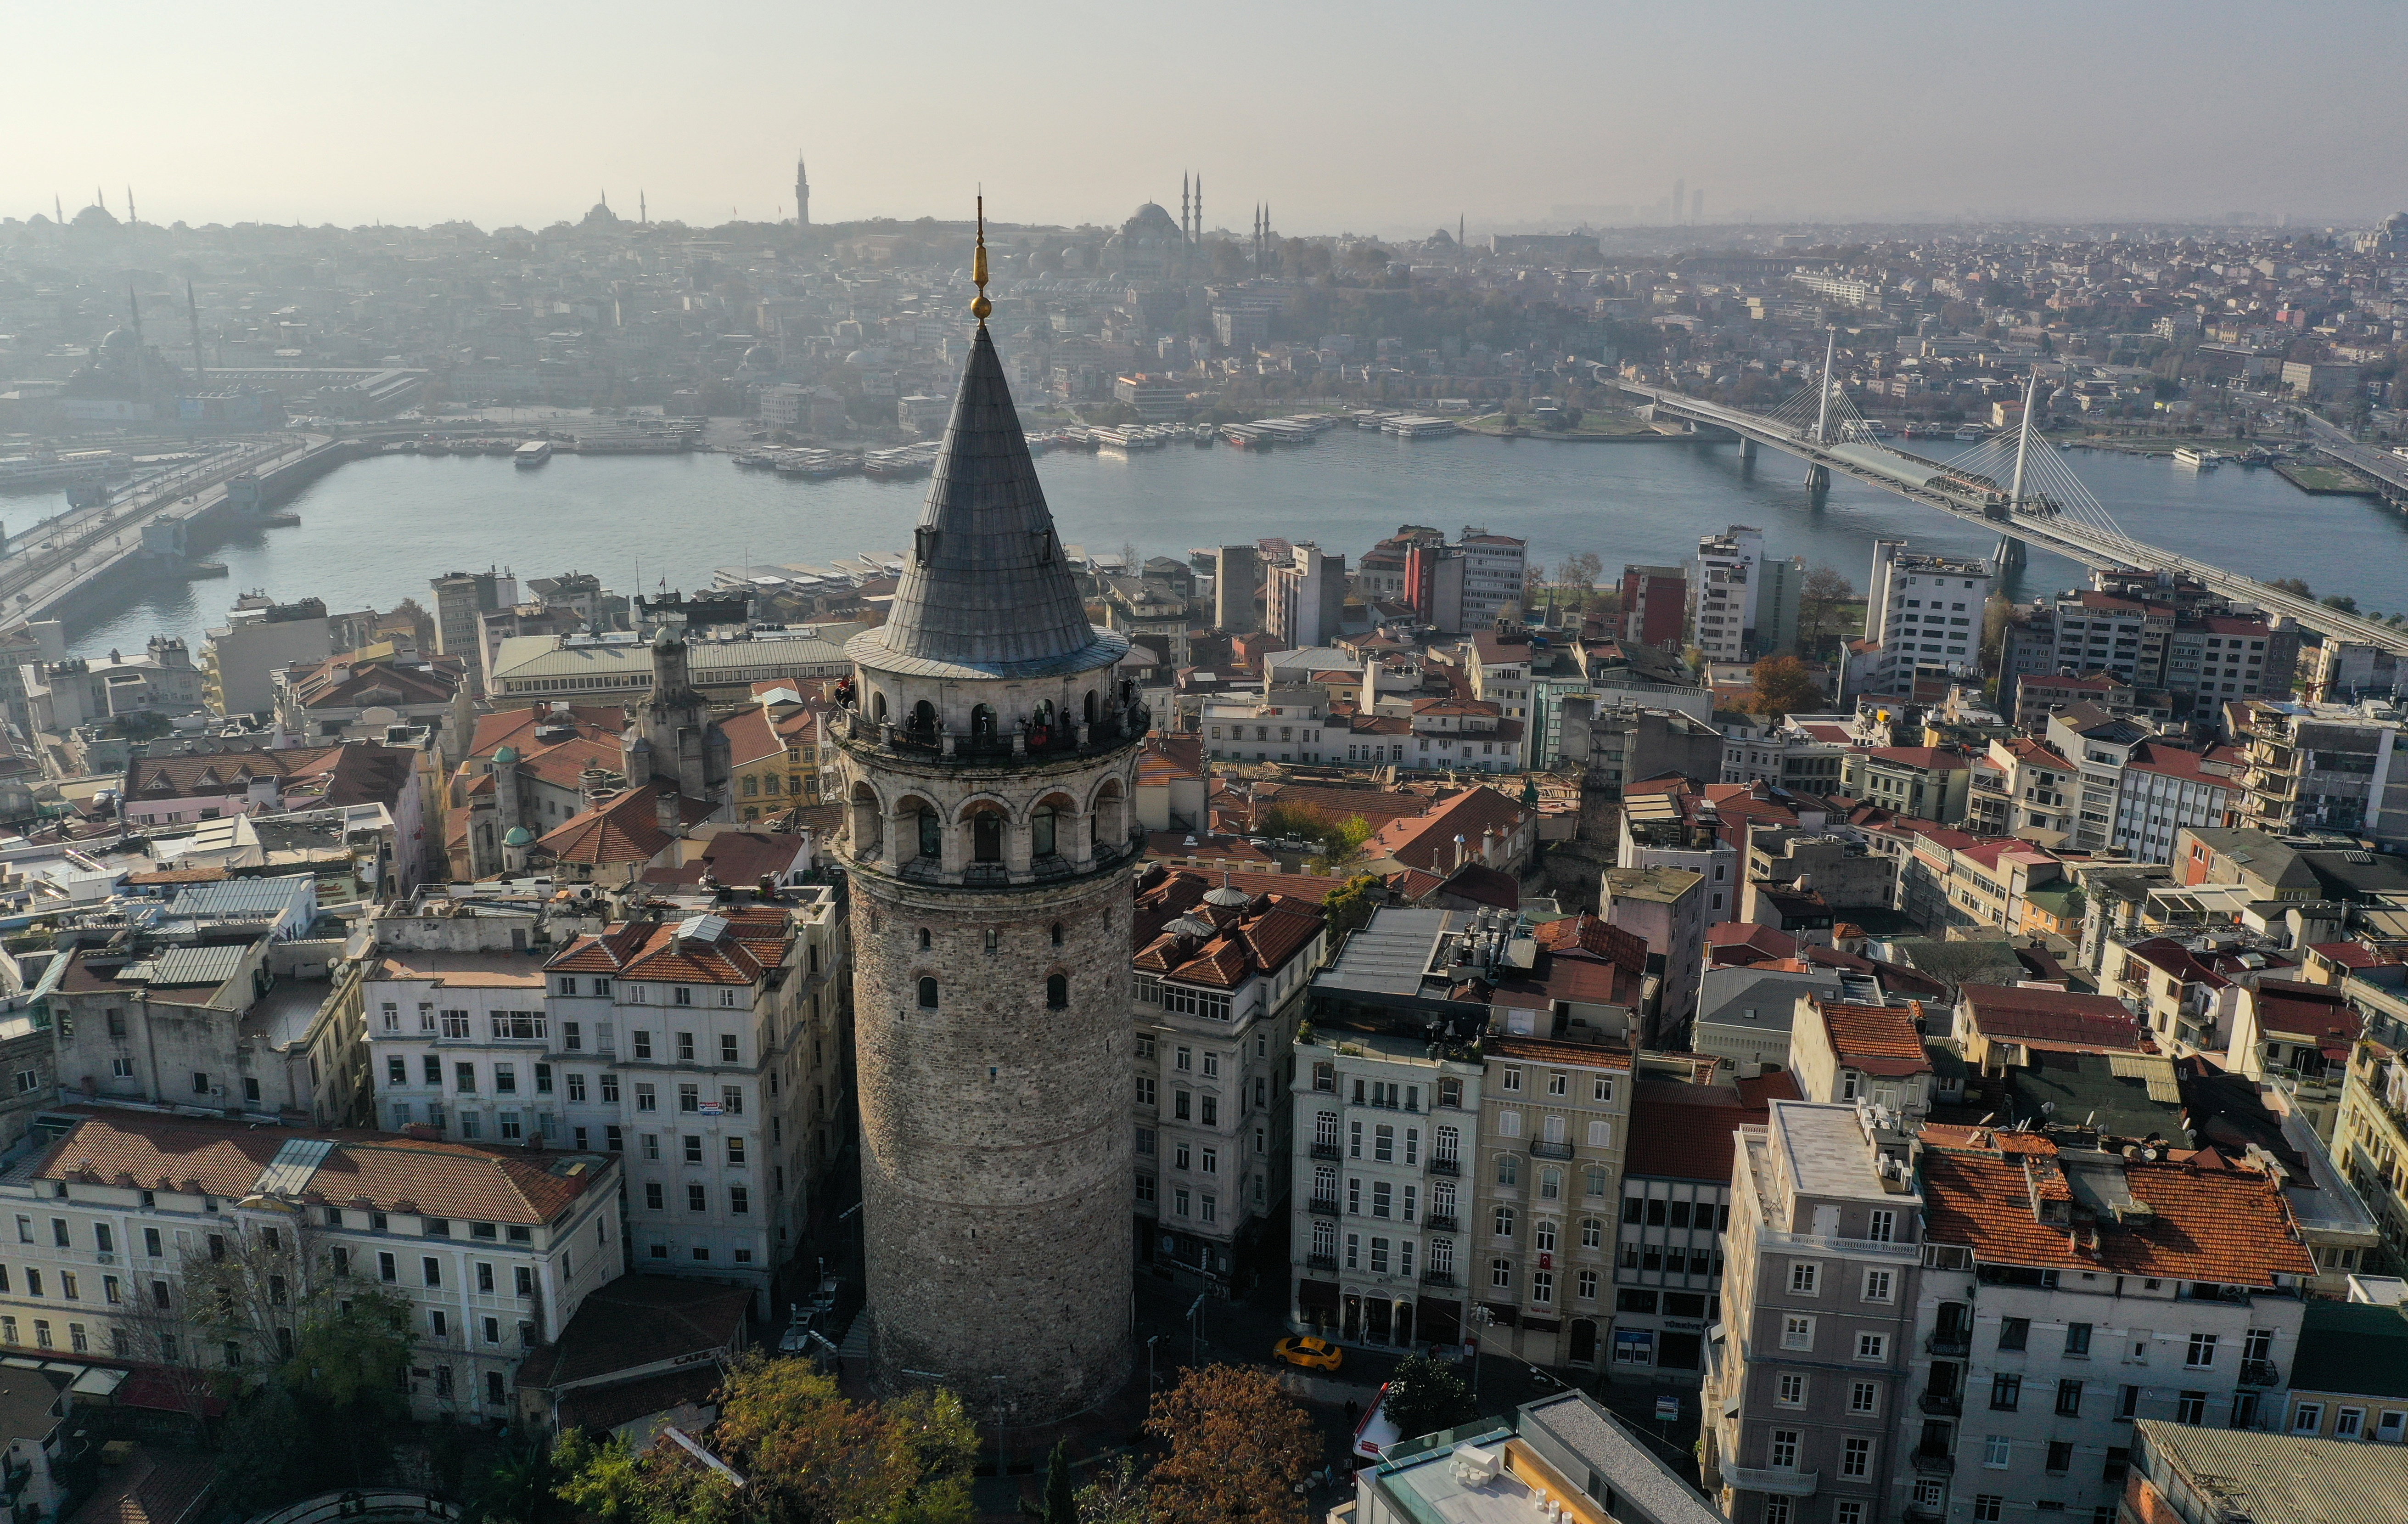 Drone footage reveals historical Galata Tower during a two-day curfew which was imposed to prevent the spread of the coronavirus disease (COVID-19), in Istanbul, Turkey, December 5, 2020. REUTERS/Mehmet Emin Caliskan